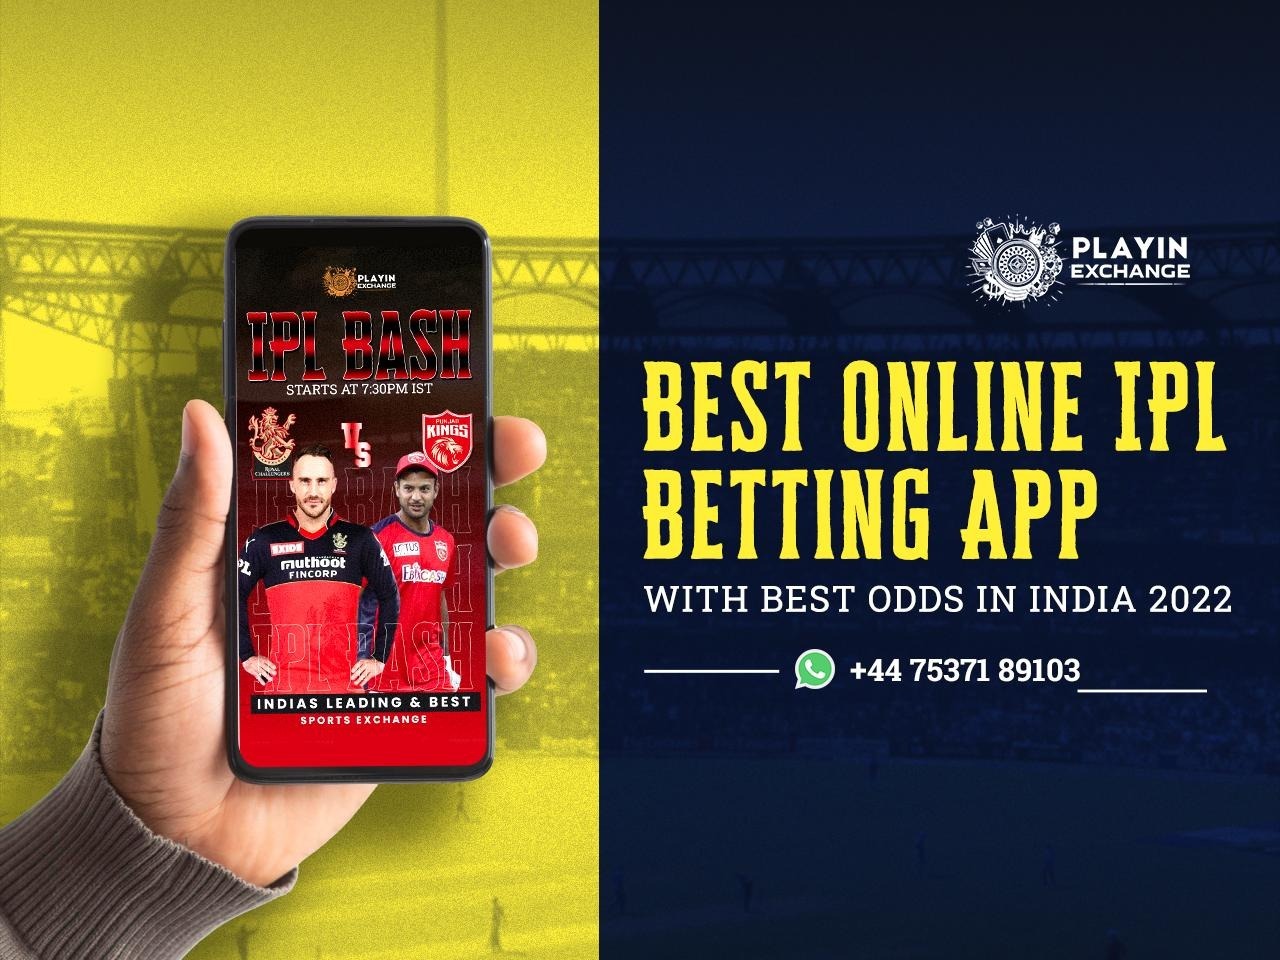 Stop Wasting Time And Start Best App For Ipl Betting